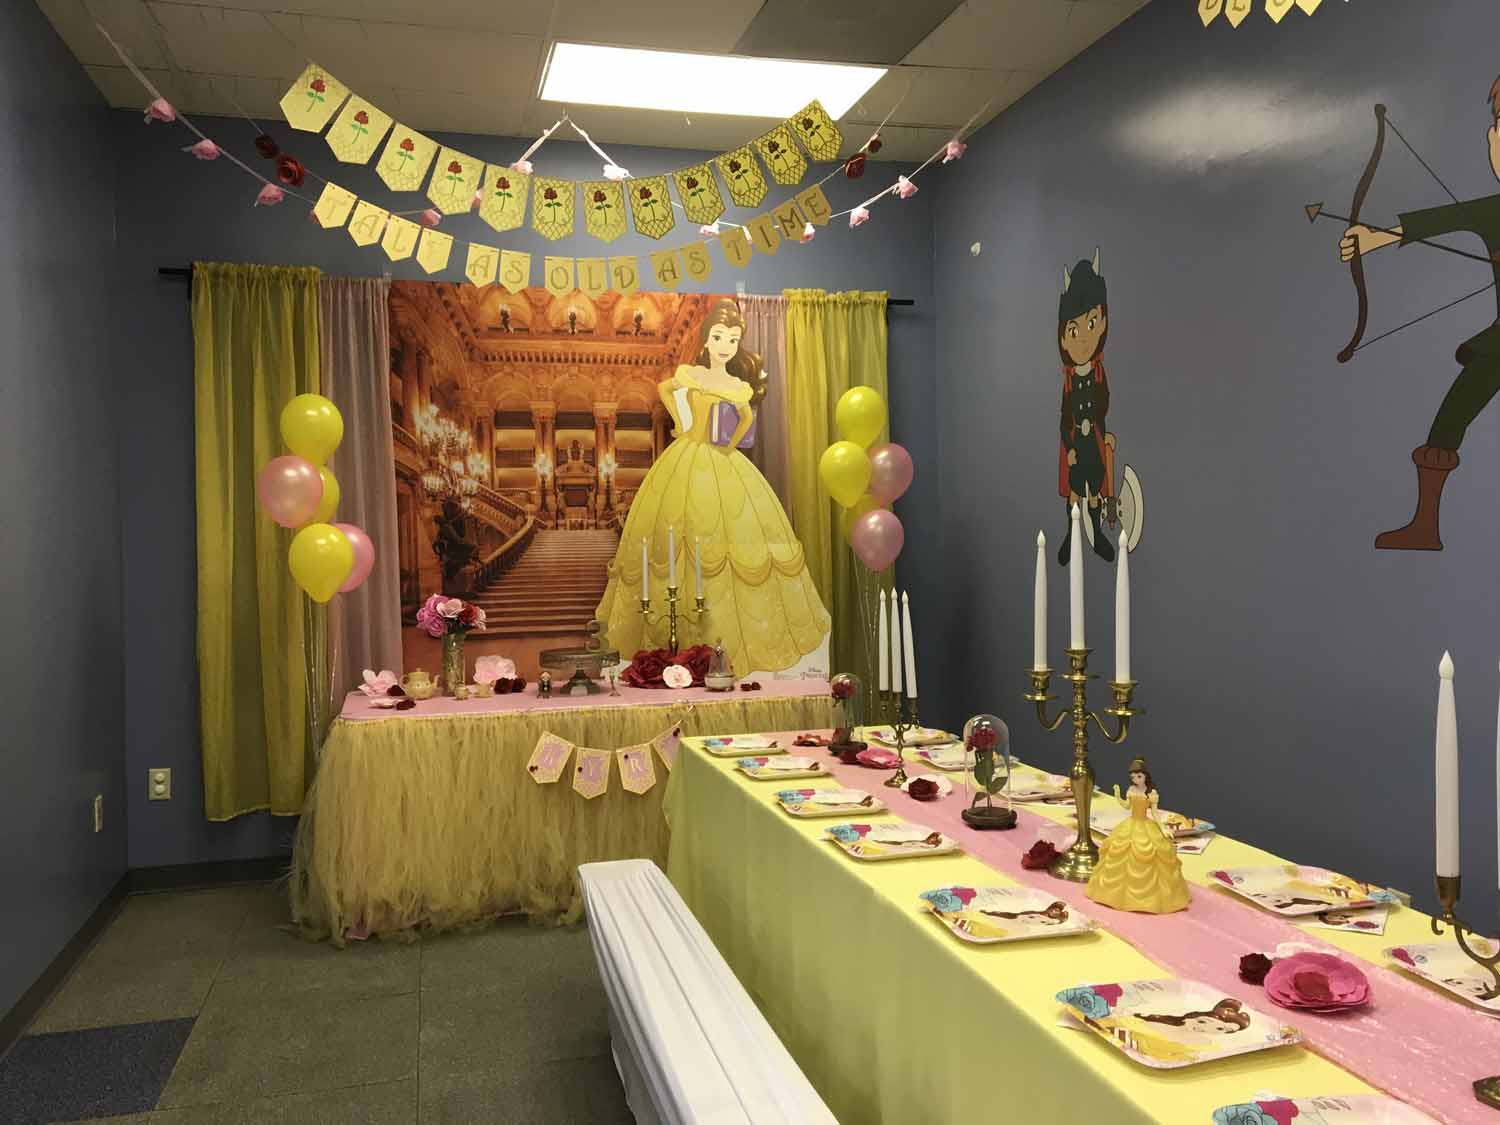 princess birthday party ideas for a 3 year old